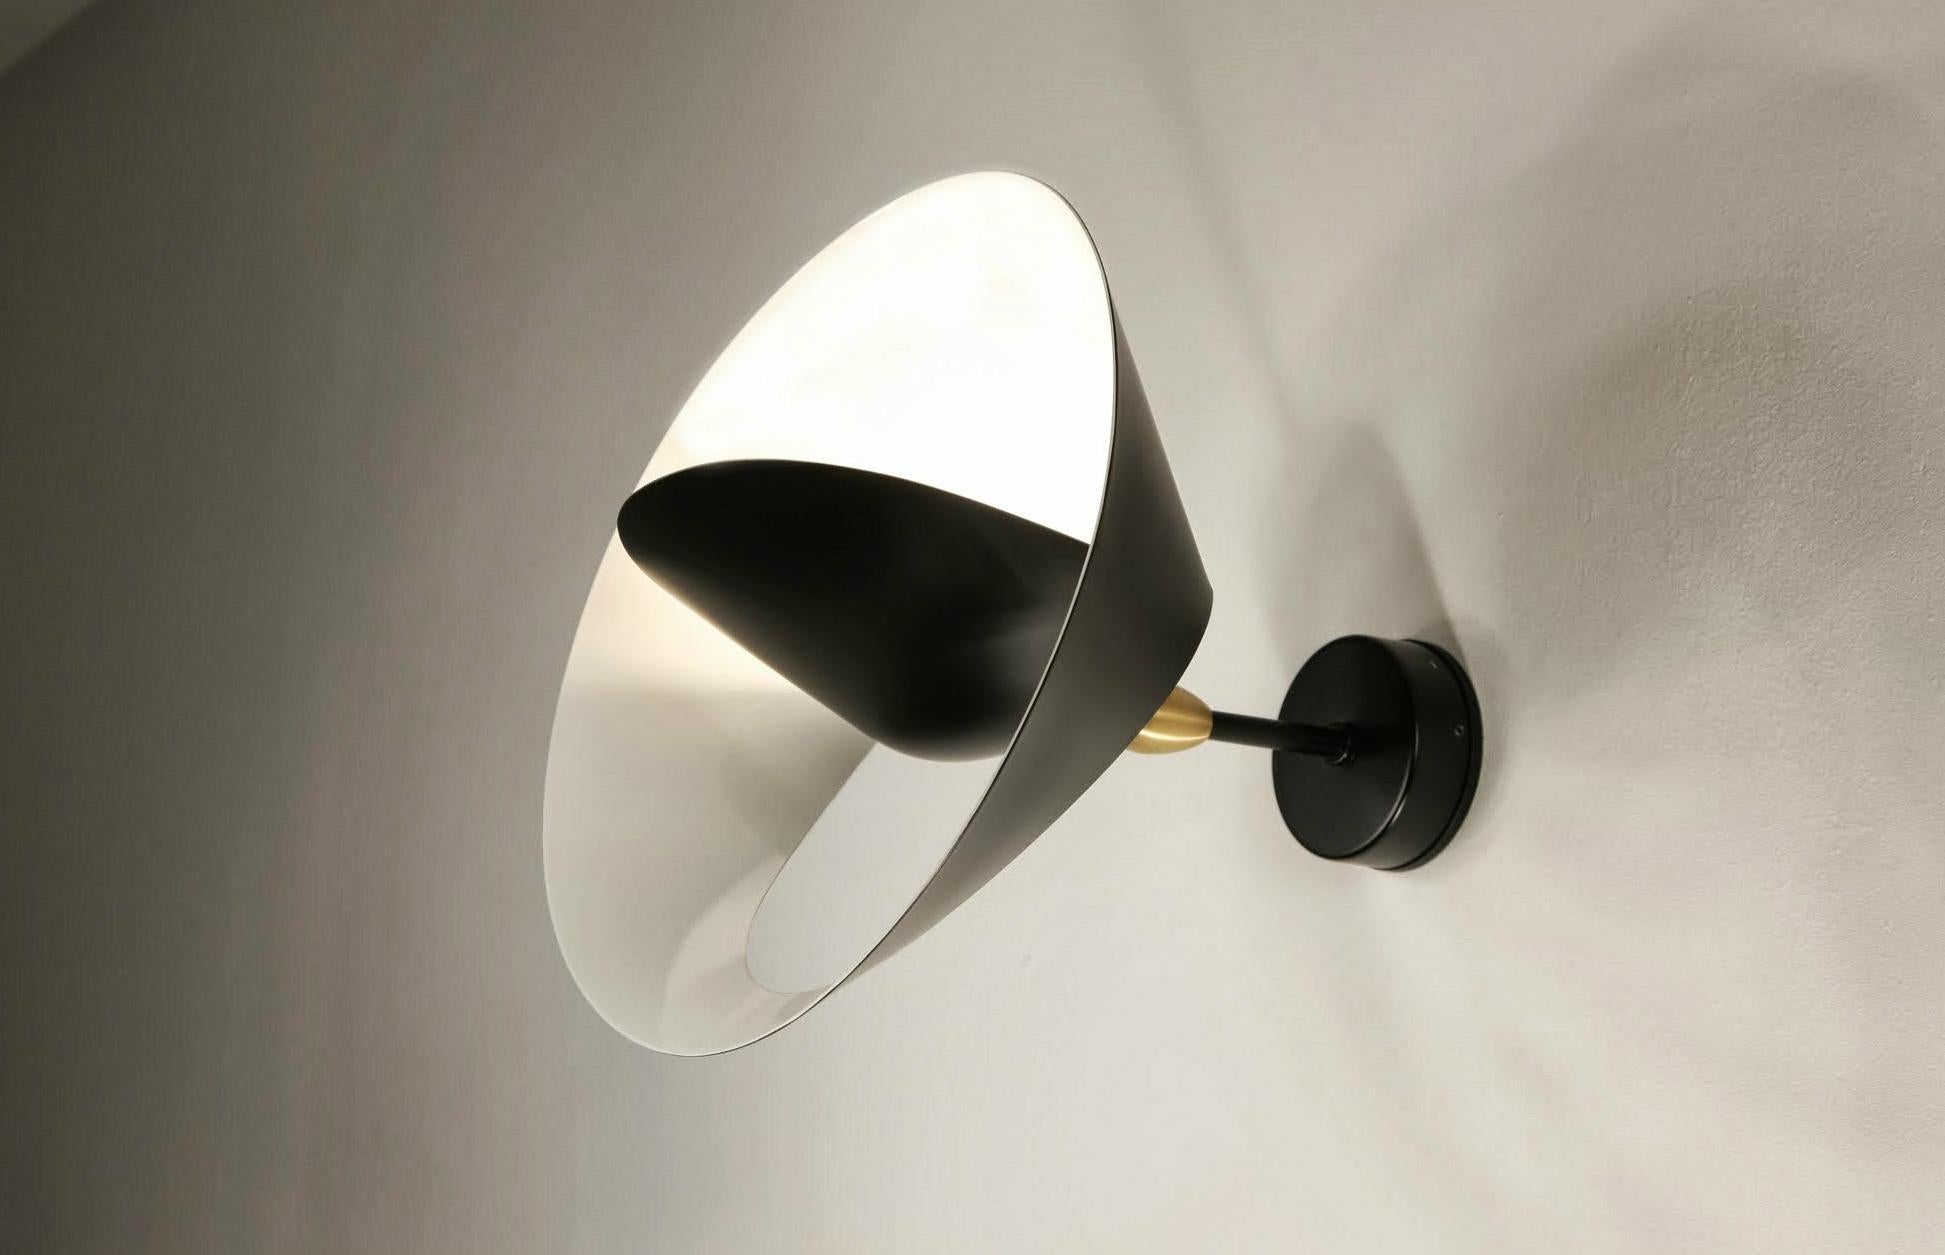 A partial cut allows the outer edge to bend revealing a sculpted ring encircling a central cone reflector to both diffuse and project light into the room. The result is reminiscent of a heavenly body.

Painted aluminum and steel with brass fixtures.